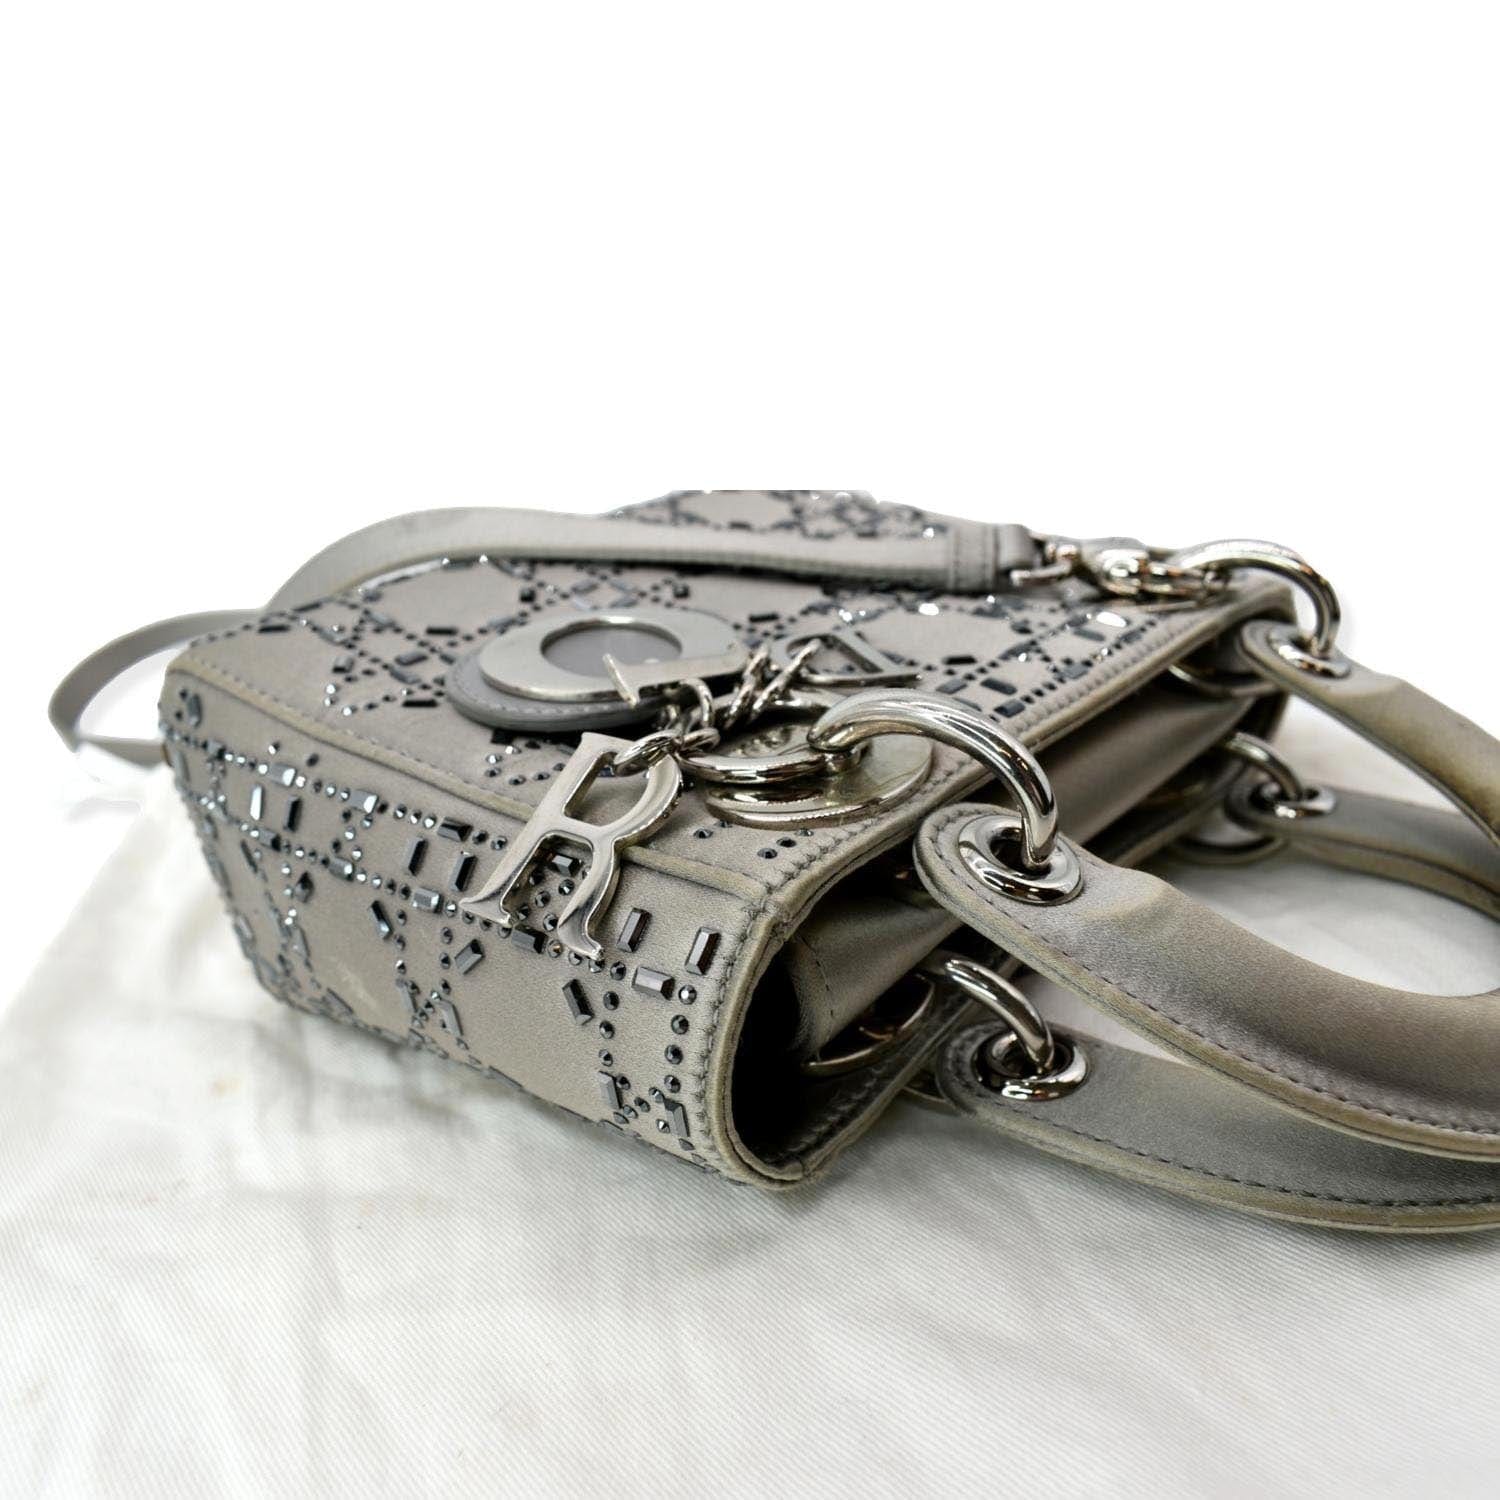 Crystal Embellished Satin And Leather Mini-pouch